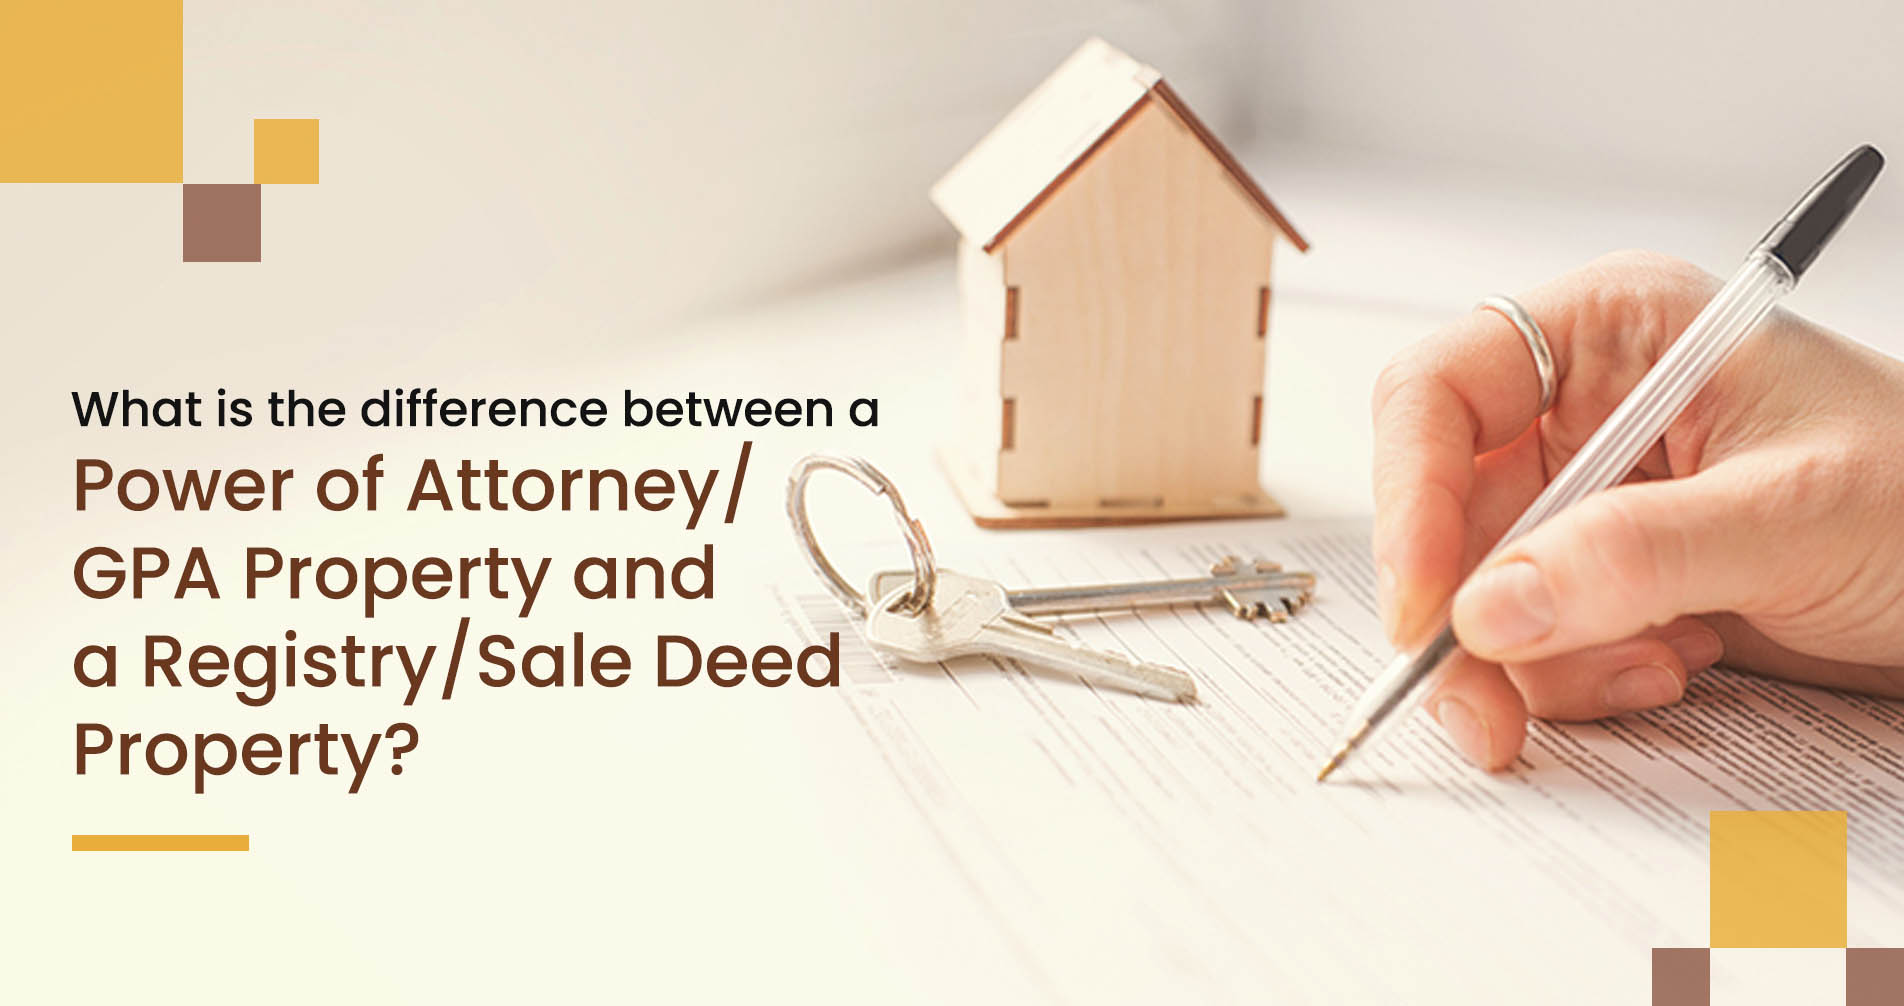 What is the Difference Between a Power of Attorney/GPA Property and a Registry/Sale Deed Property?